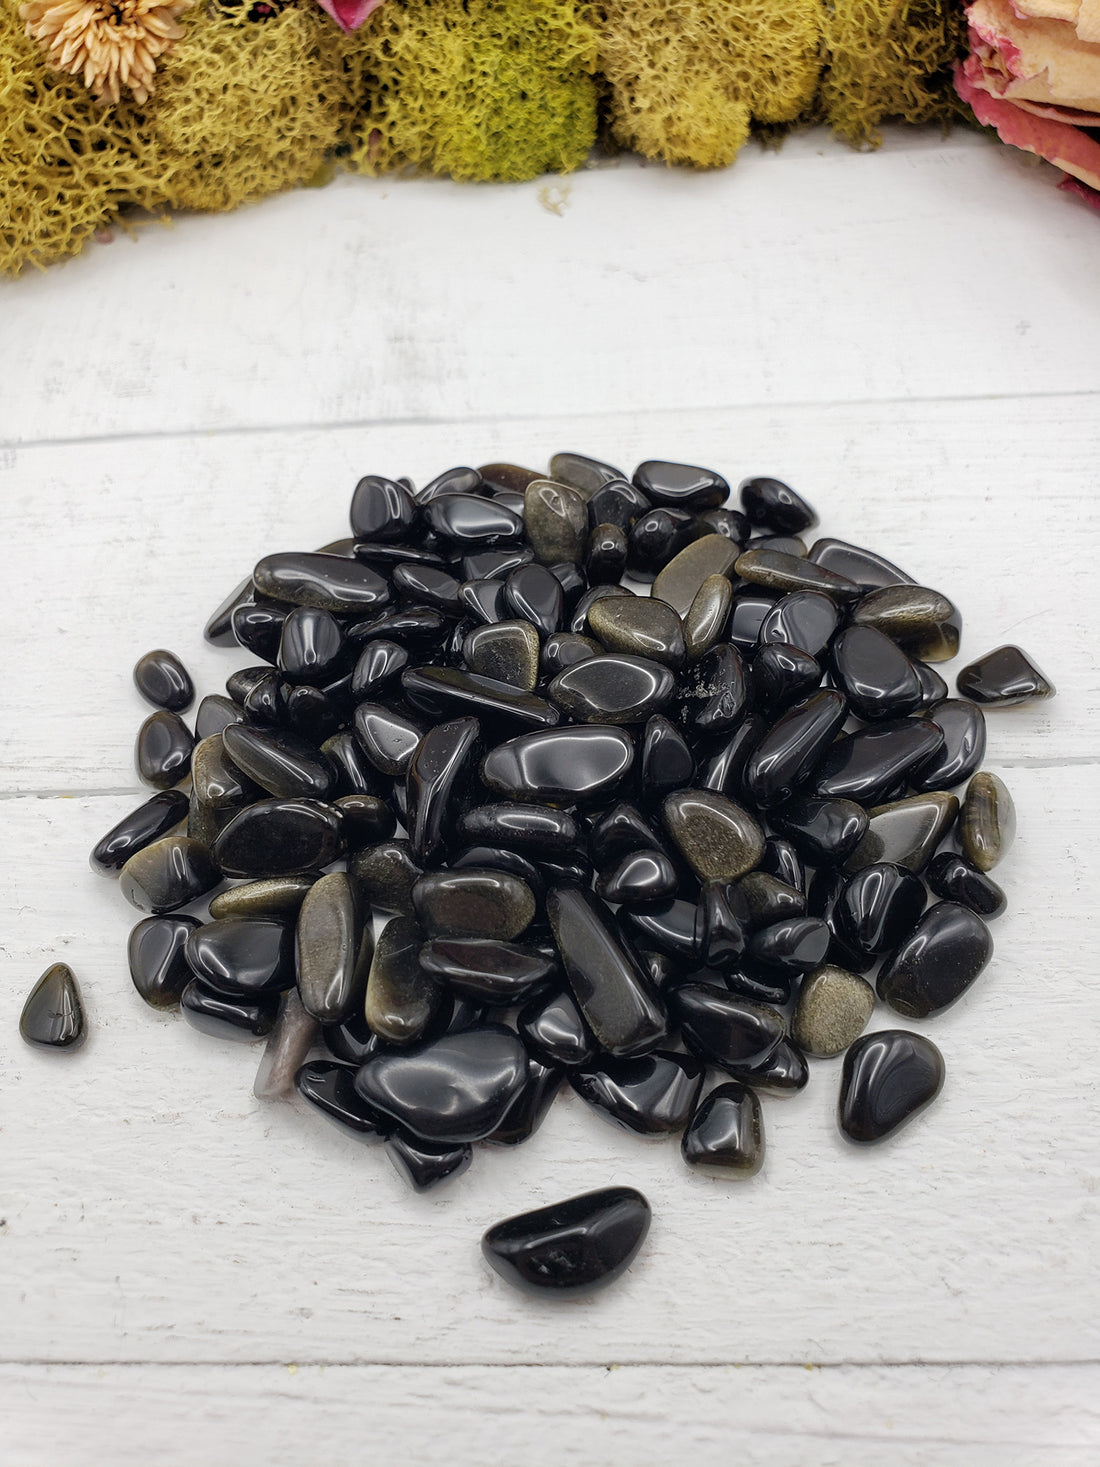 Two ounces of gold sheen obsidian chips on display